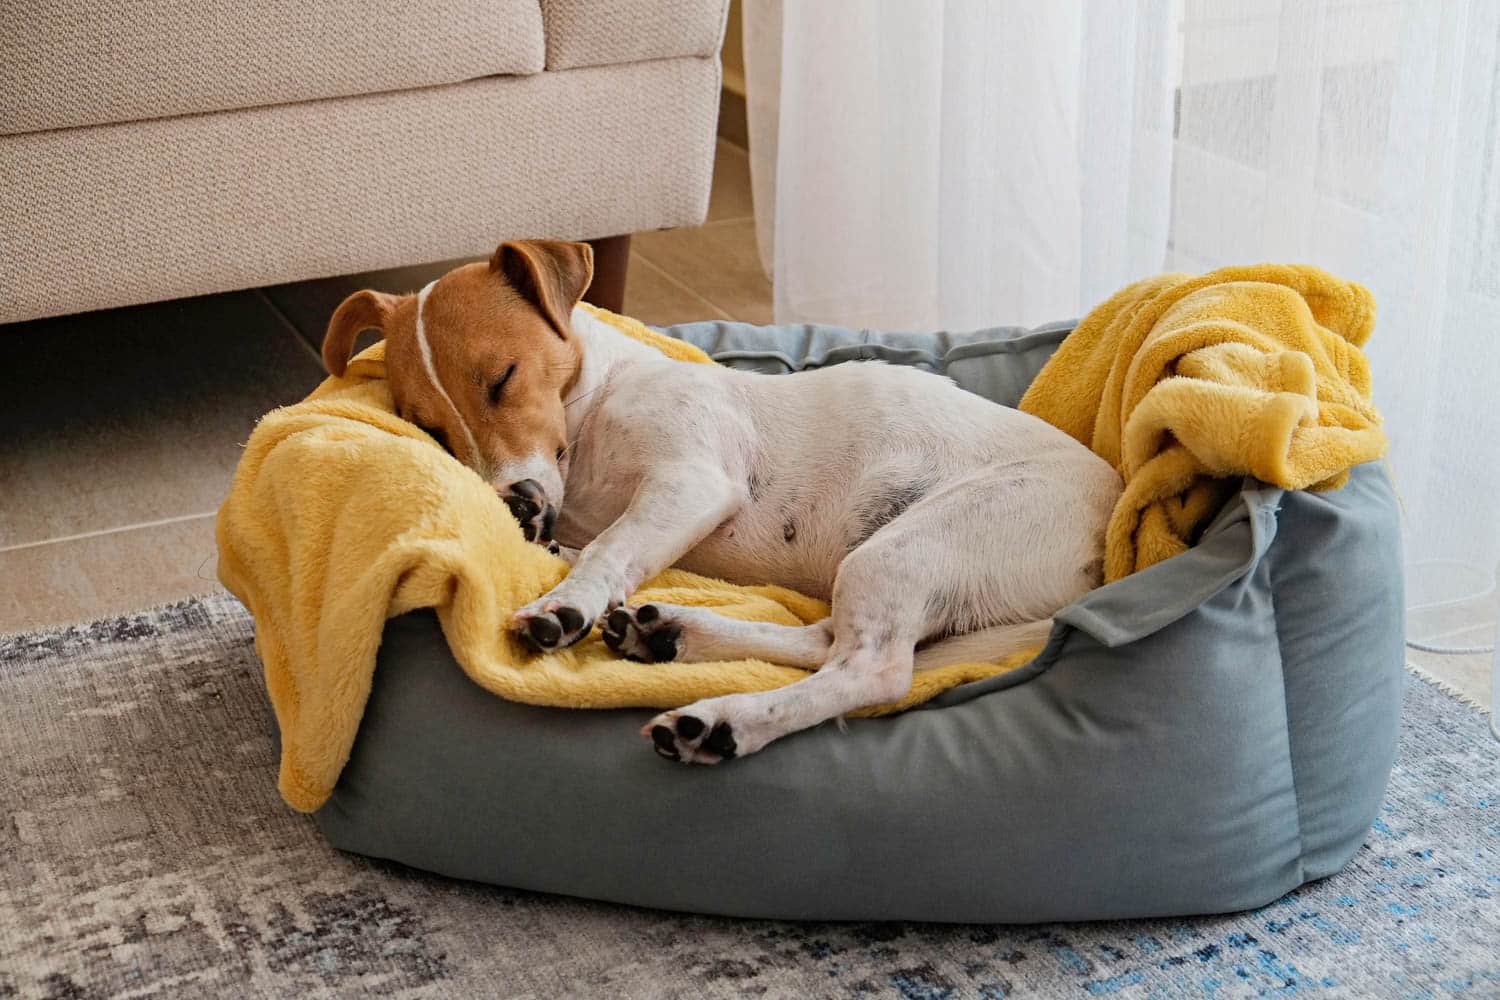 Cute sleepy Jack Russel terrier puppy with big ears resting on a